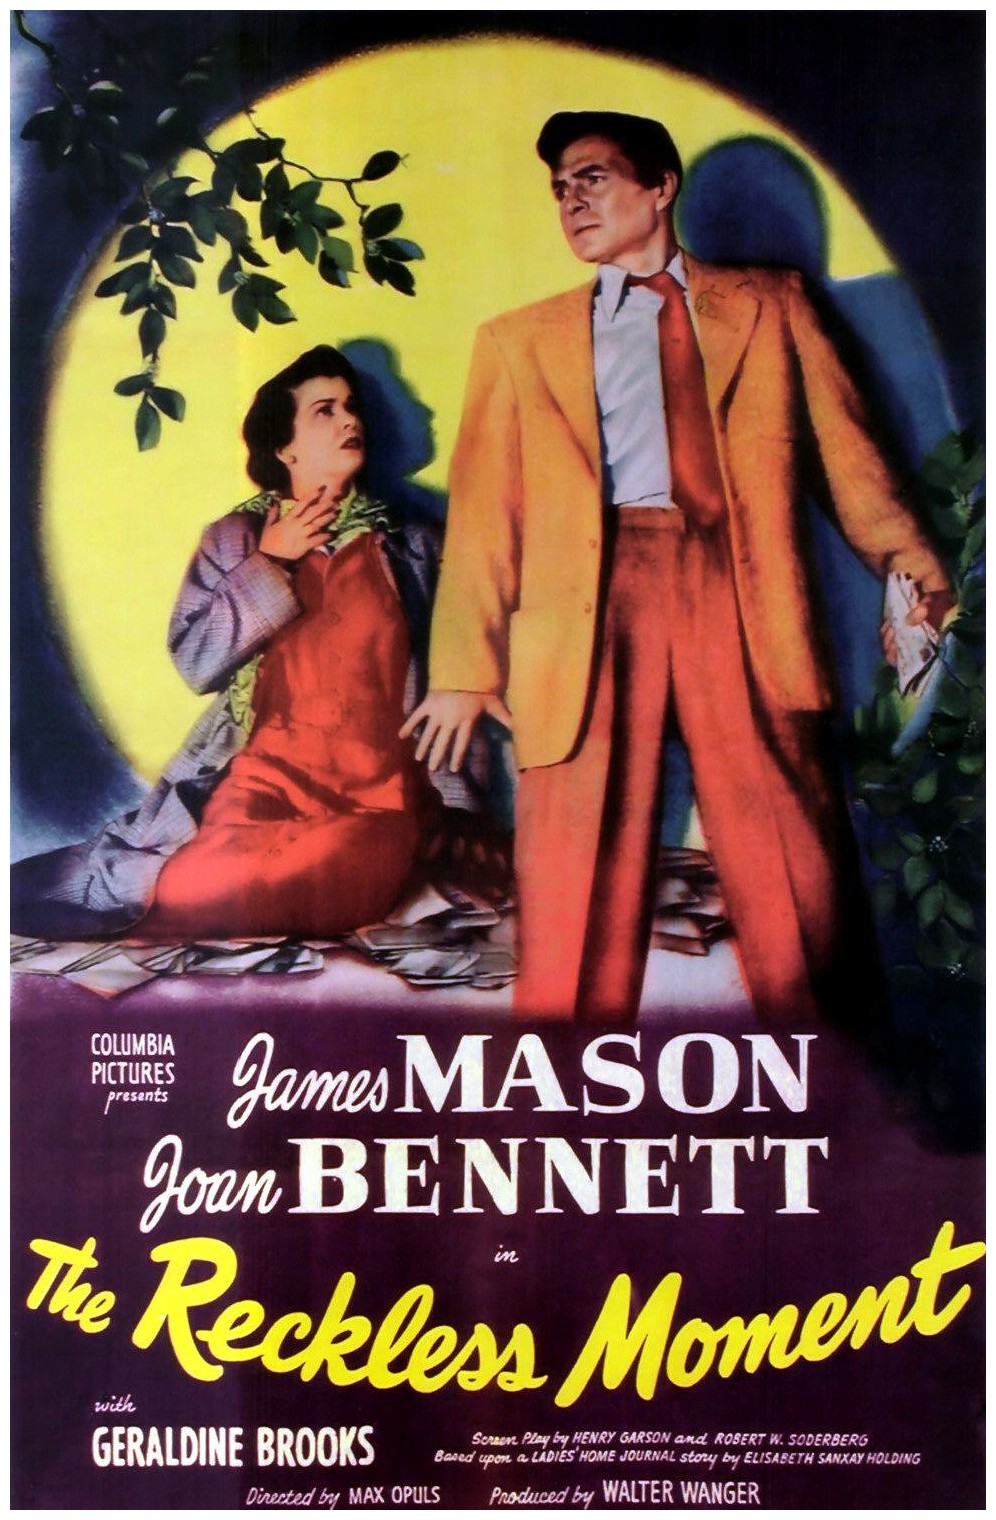 The Reckless Moment film poster (1949).